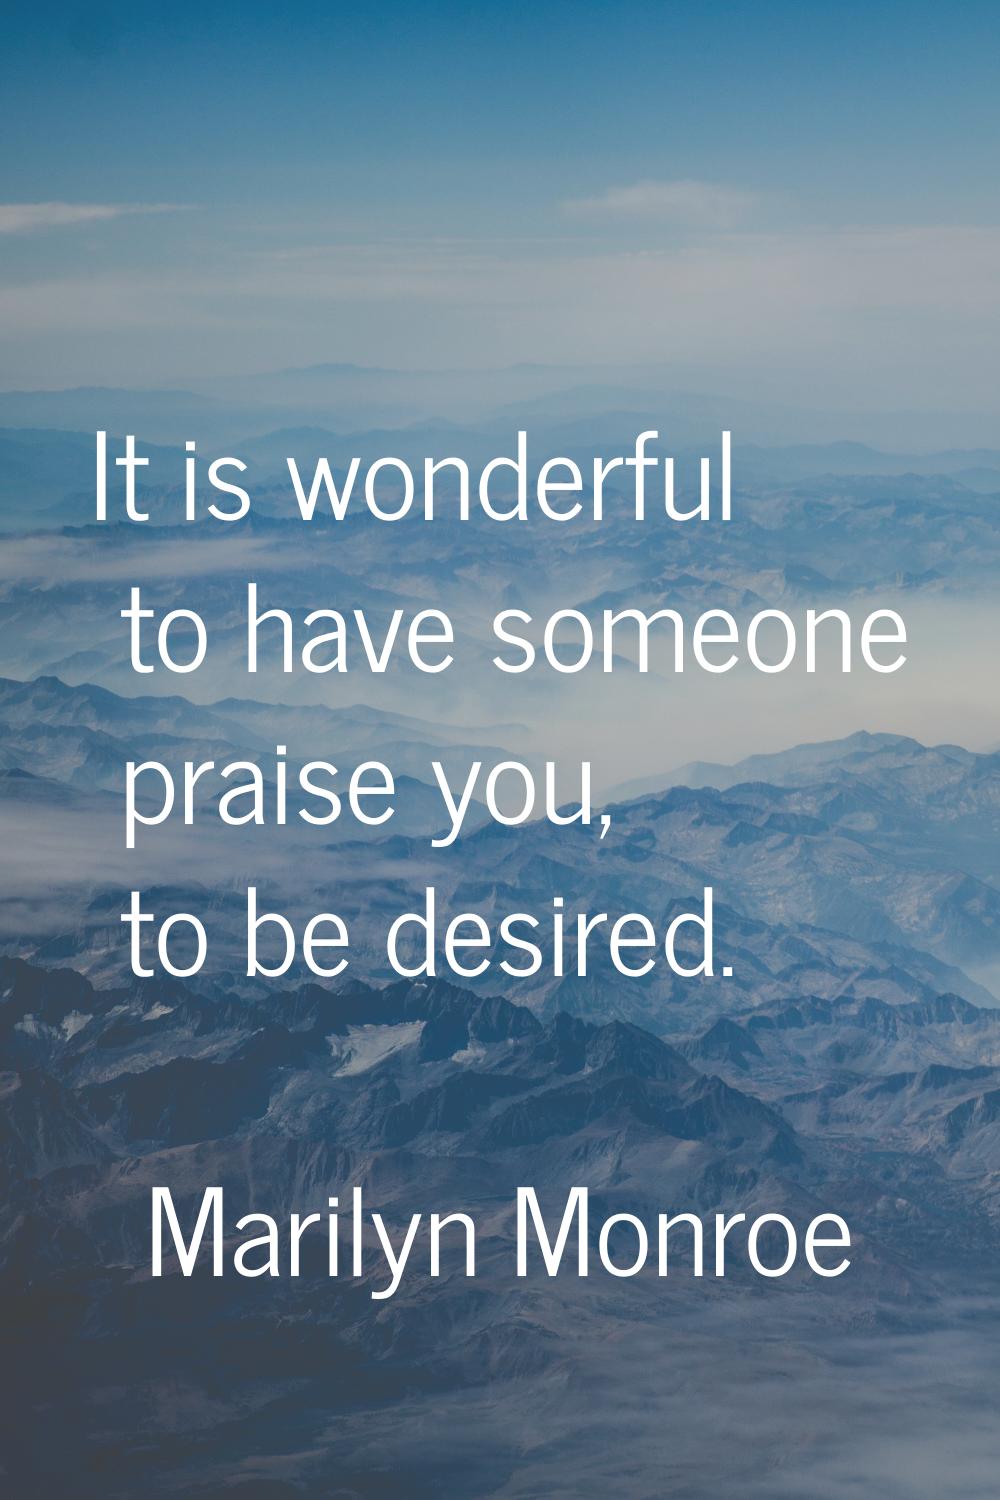 It is wonderful to have someone praise you, to be desired.